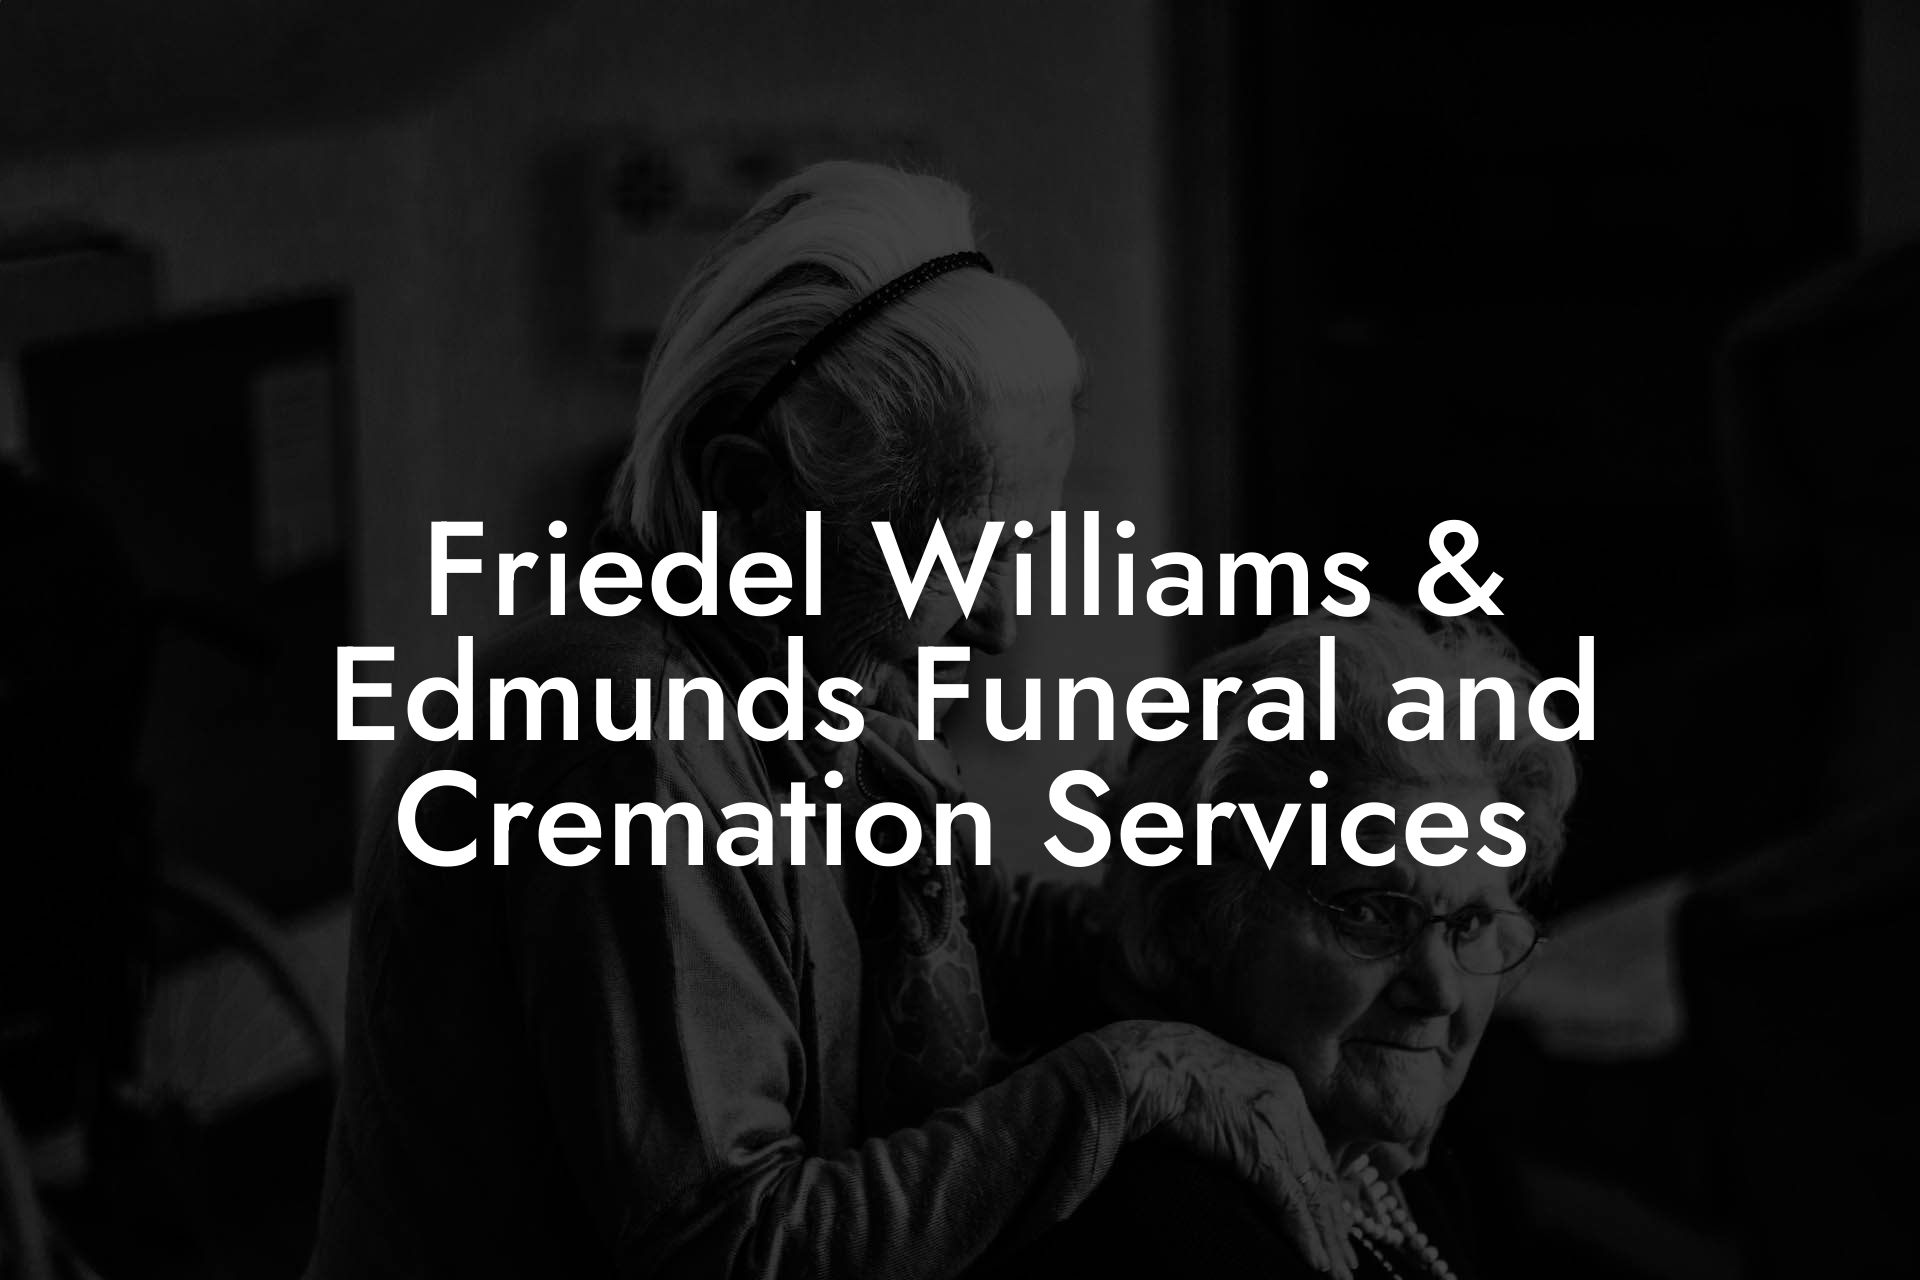 Friedel Williams & Edmunds Funeral and Cremation Services